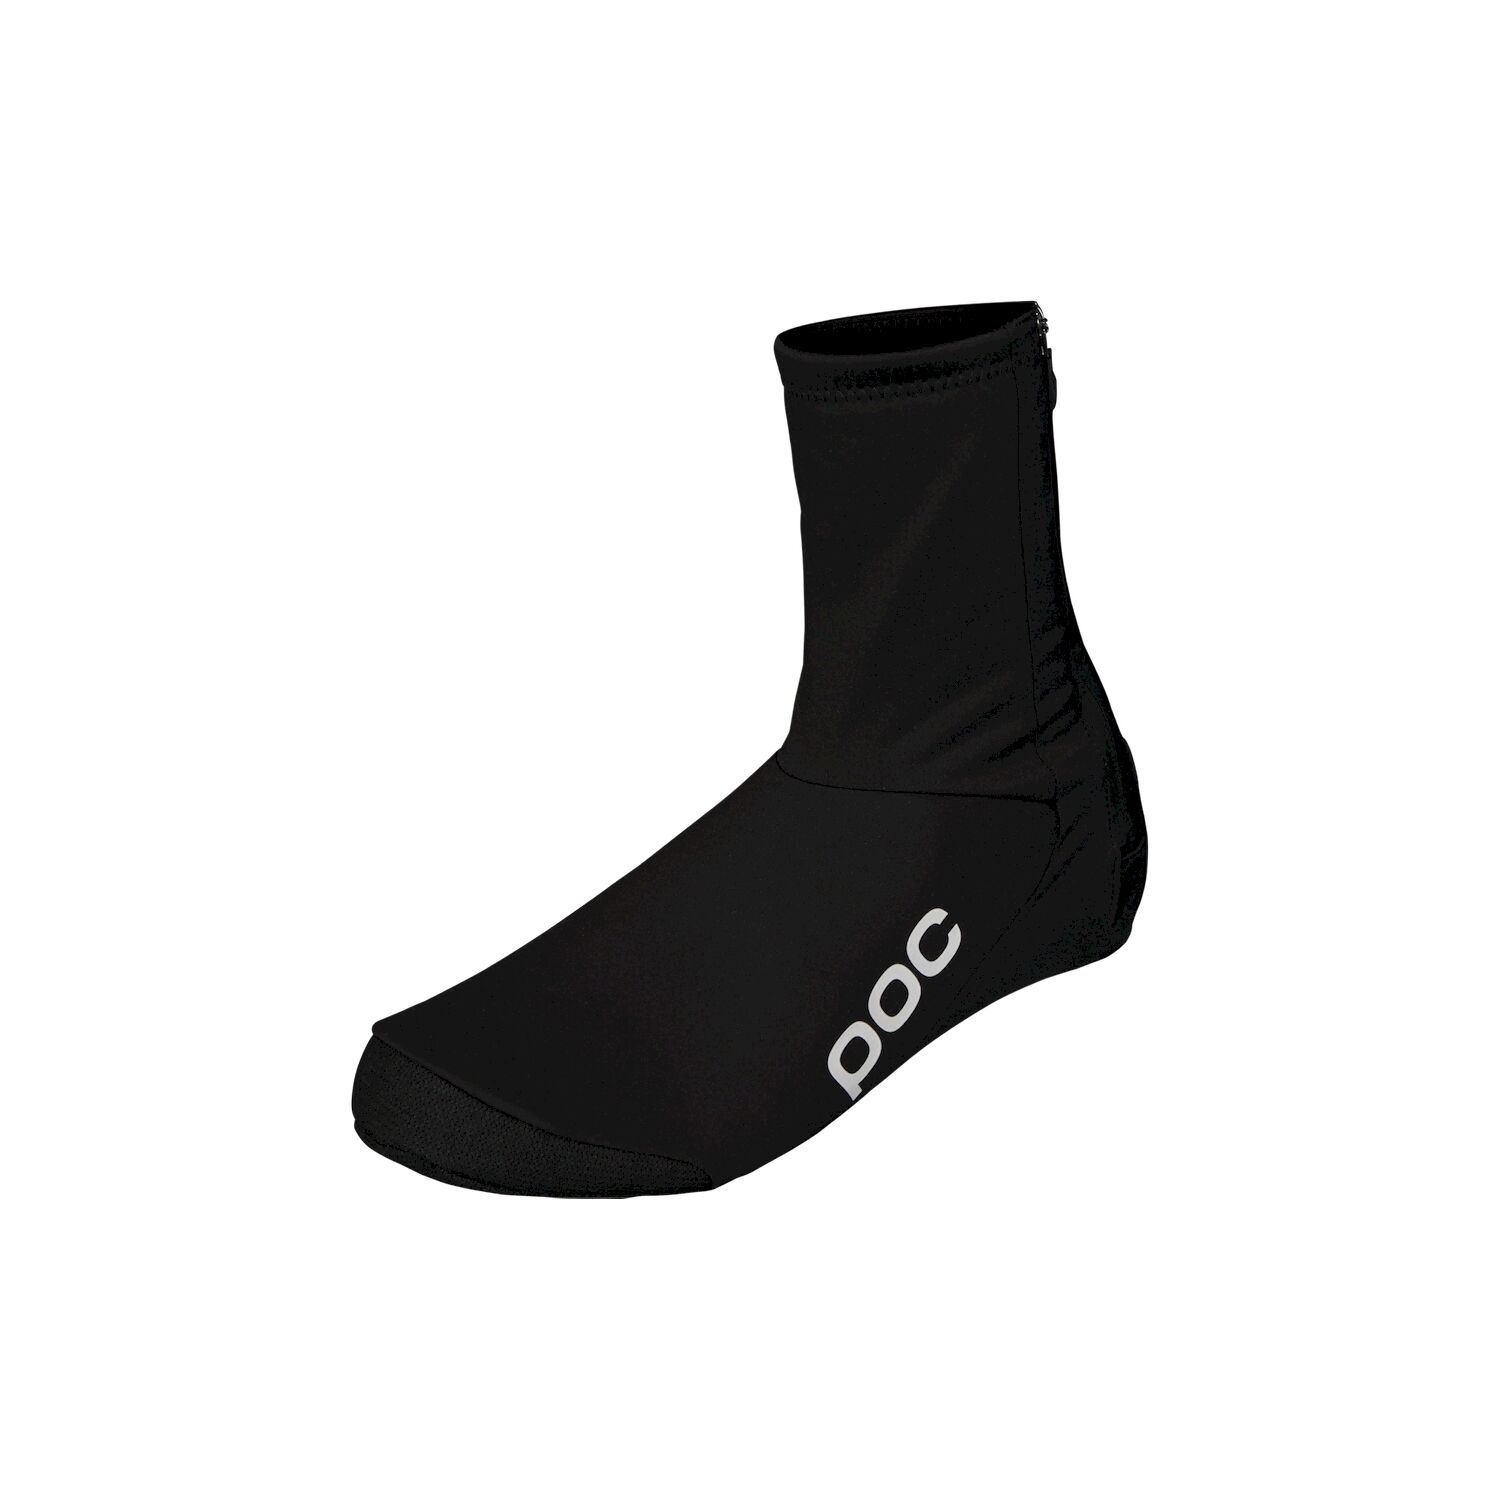 Poc Thermal Heavy Bootie - Cycling overshoes